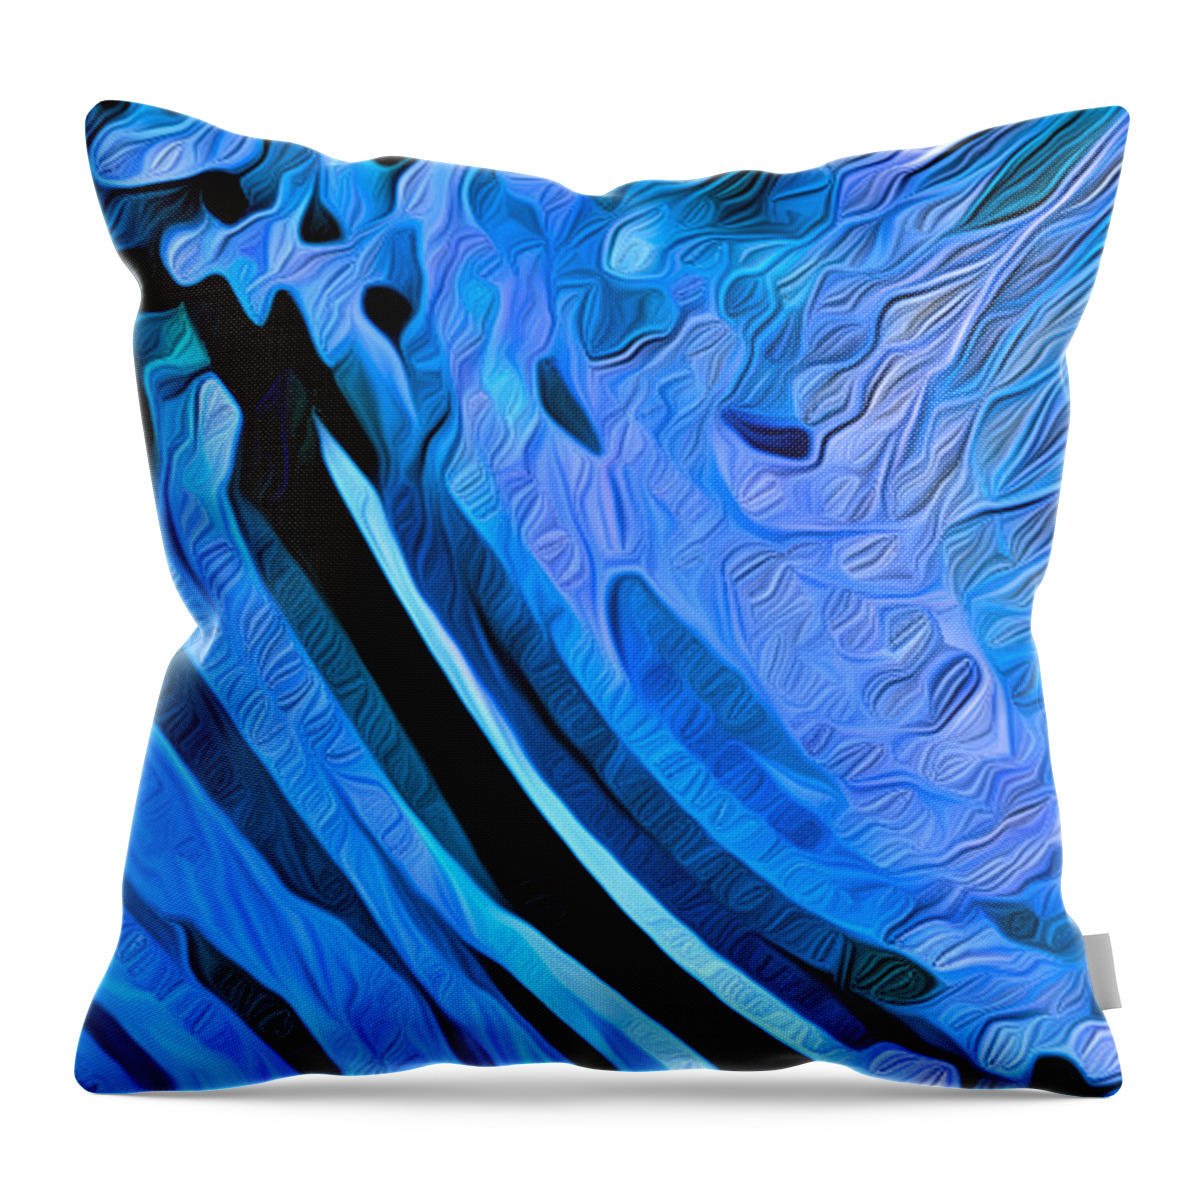 Digital Throw Pillow featuring the digital art River Flows Abstract by Ronald Mills